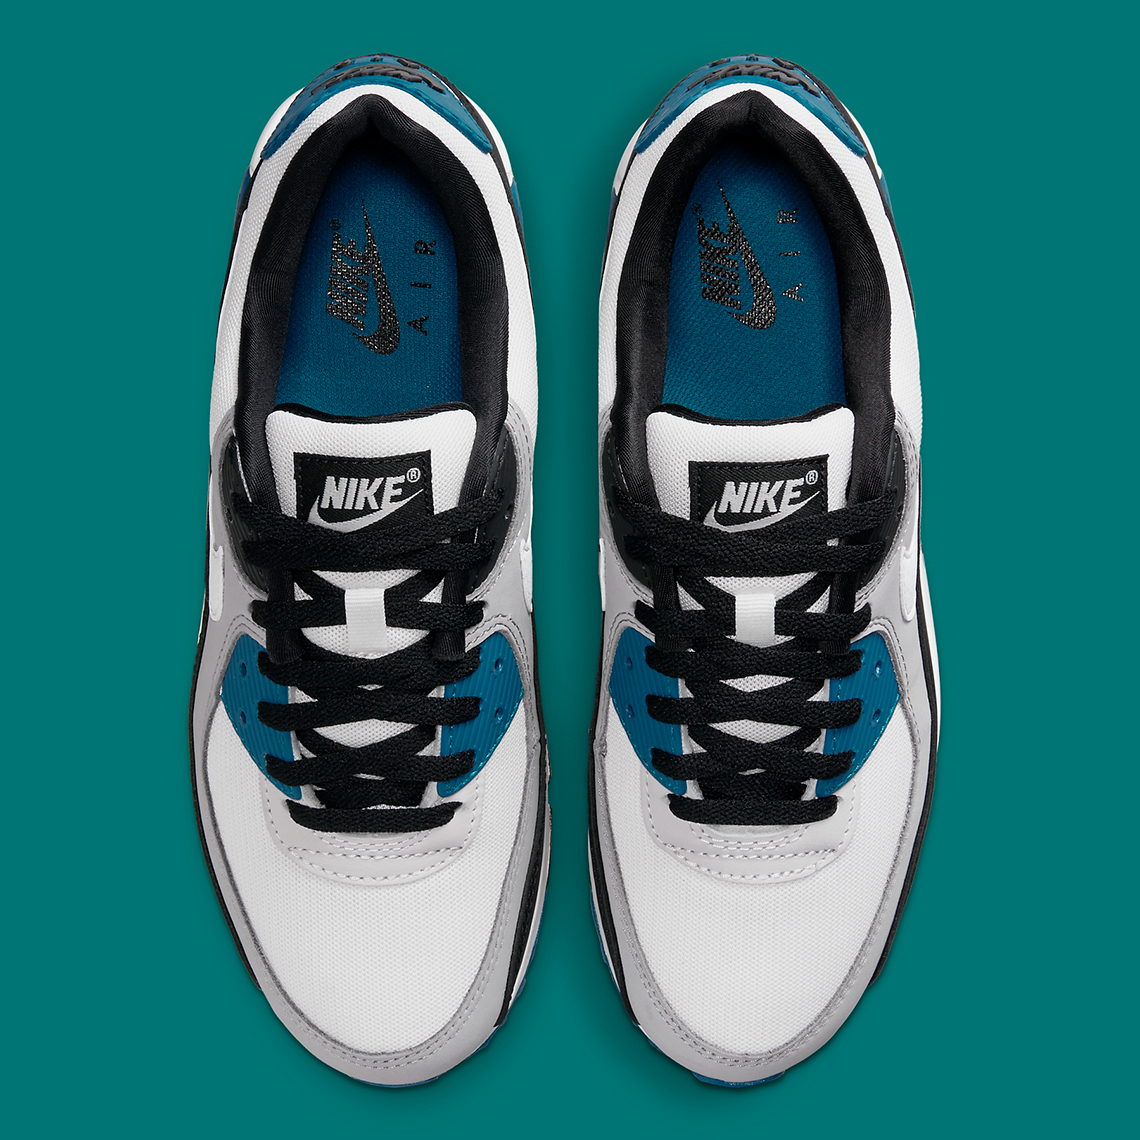 Nike Are Dropping Grand Slam-Inspired s White Black Teal Fb9658 002 3